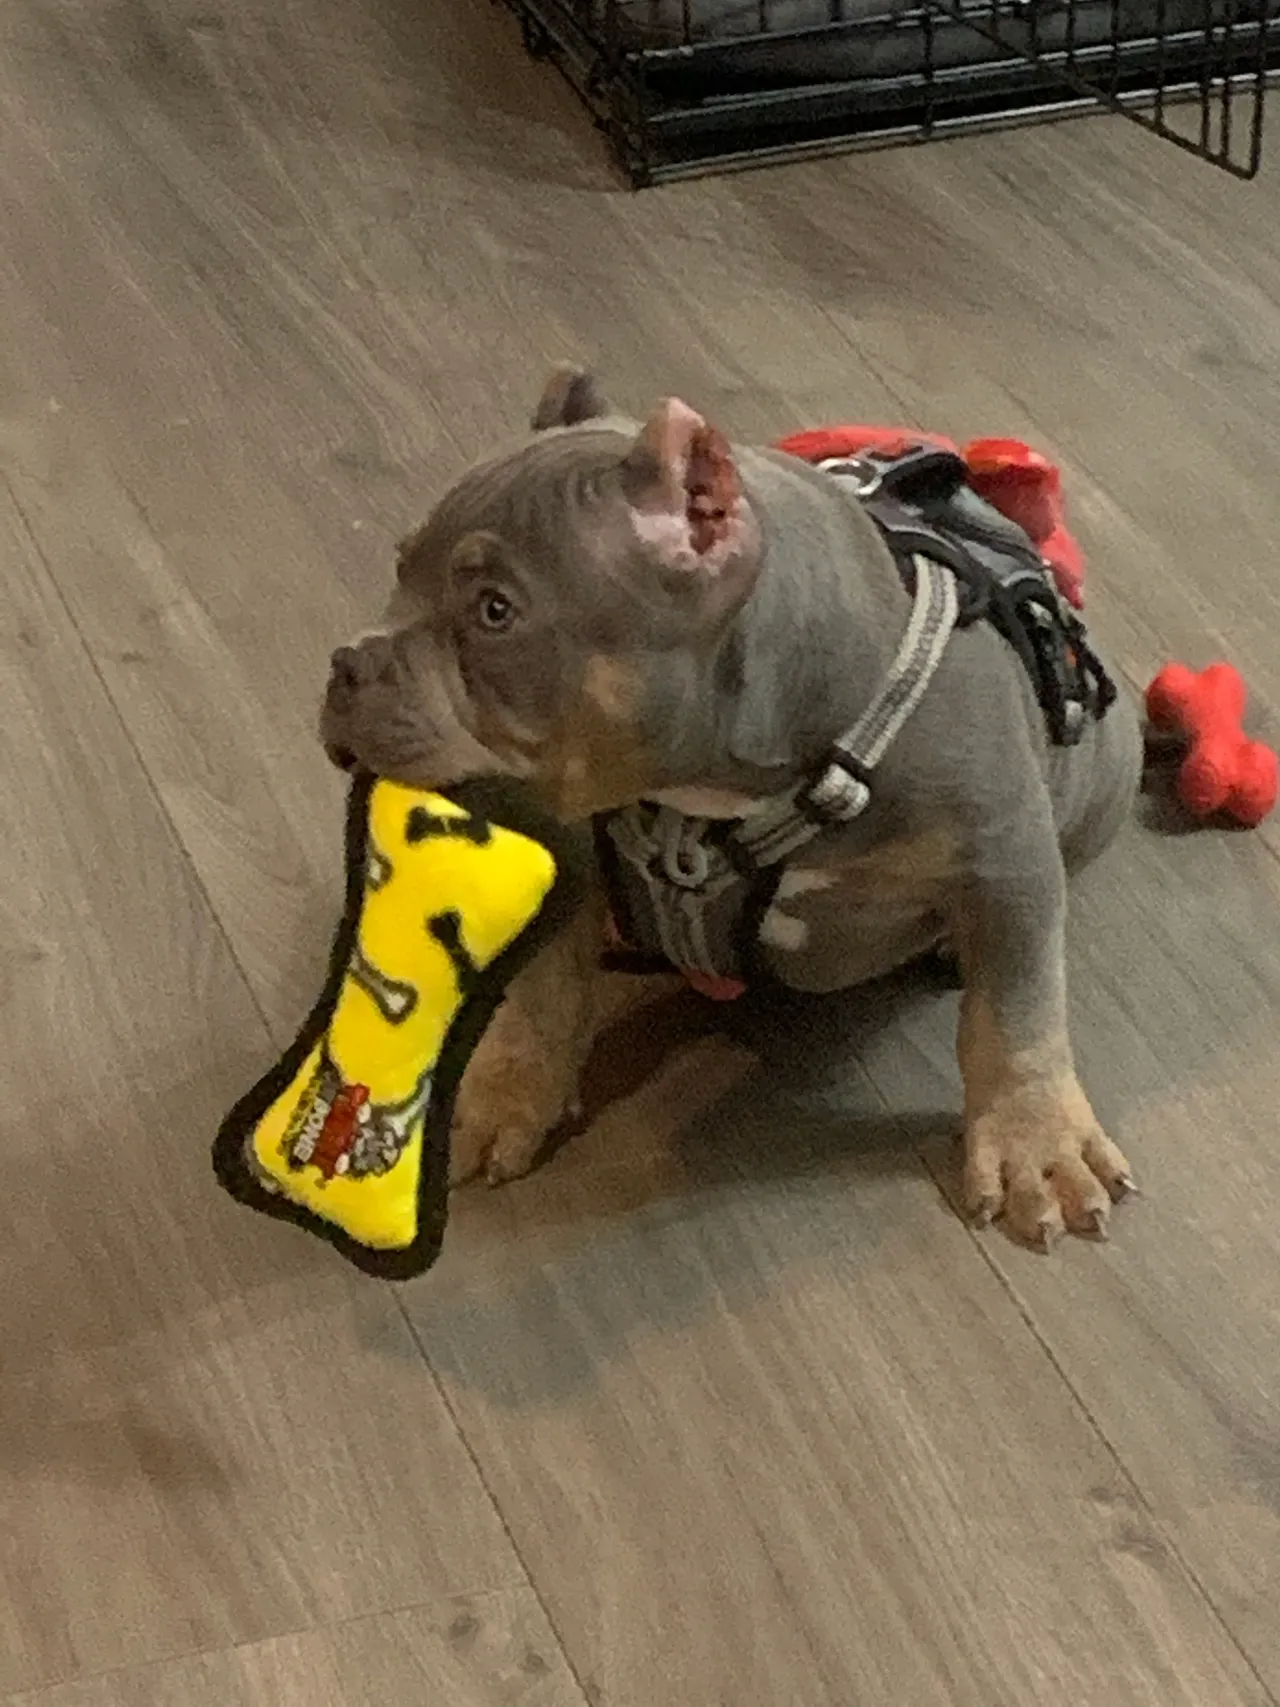 Gray dog with a harness chewing on a yellow toy.